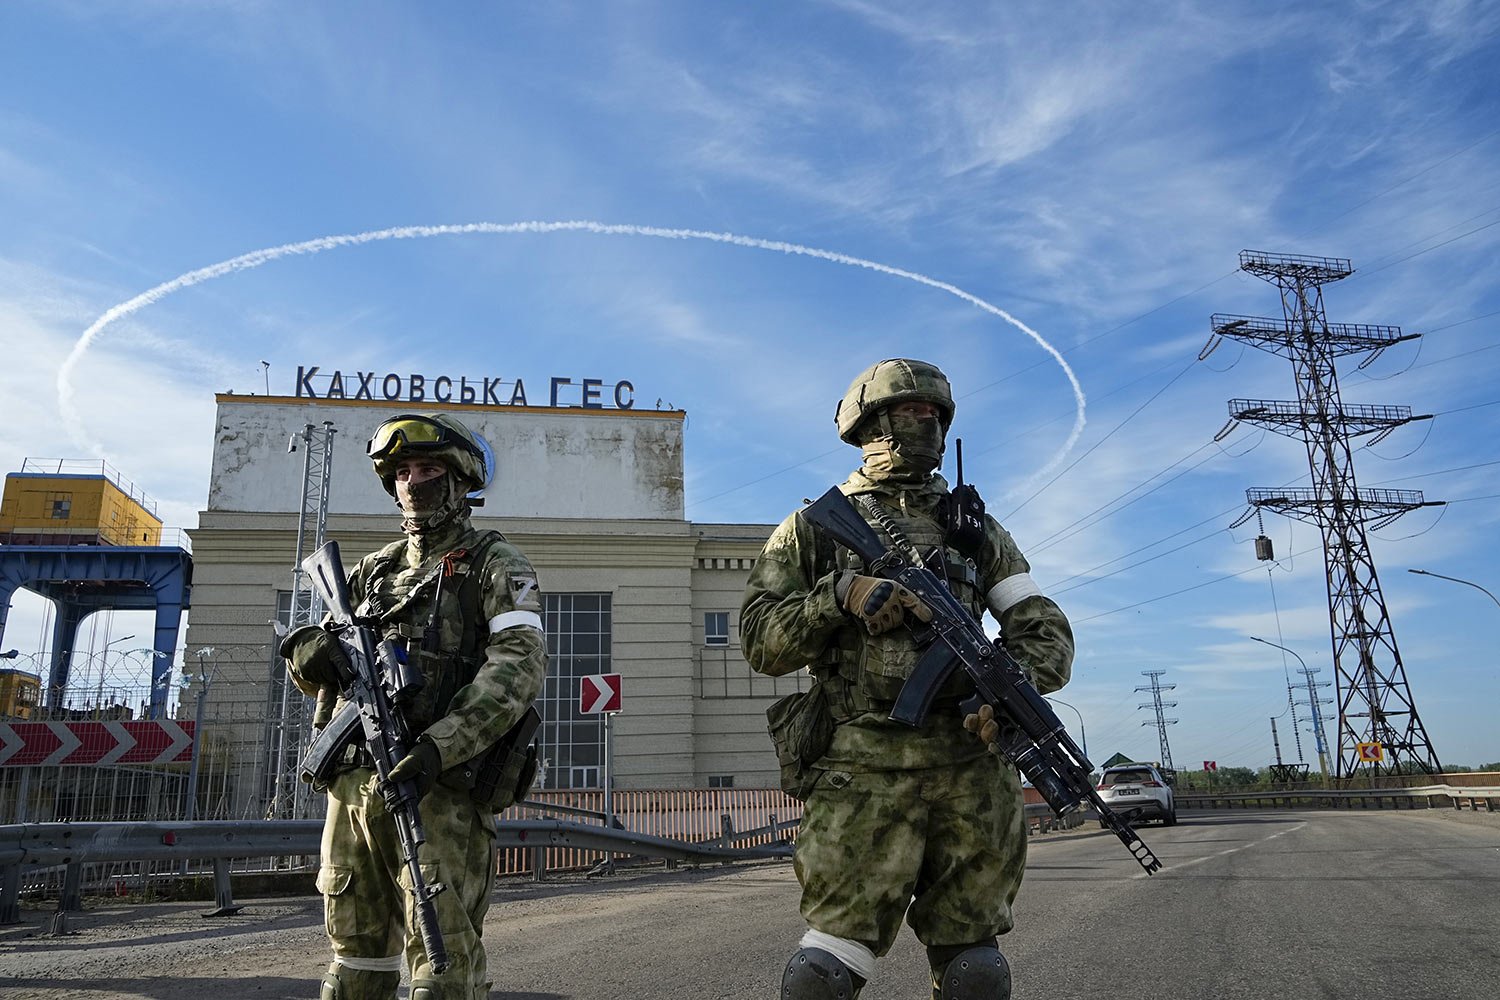  Russian troops guard an entrance of the Kakhovka Hydroelectric Station, a run-of-the-river power plant on the Dnieper River in Kherson region, southern Ukraine, Friday, May 20, 2022, during a trip organized by the Russian Ministry of Defense. The Kh